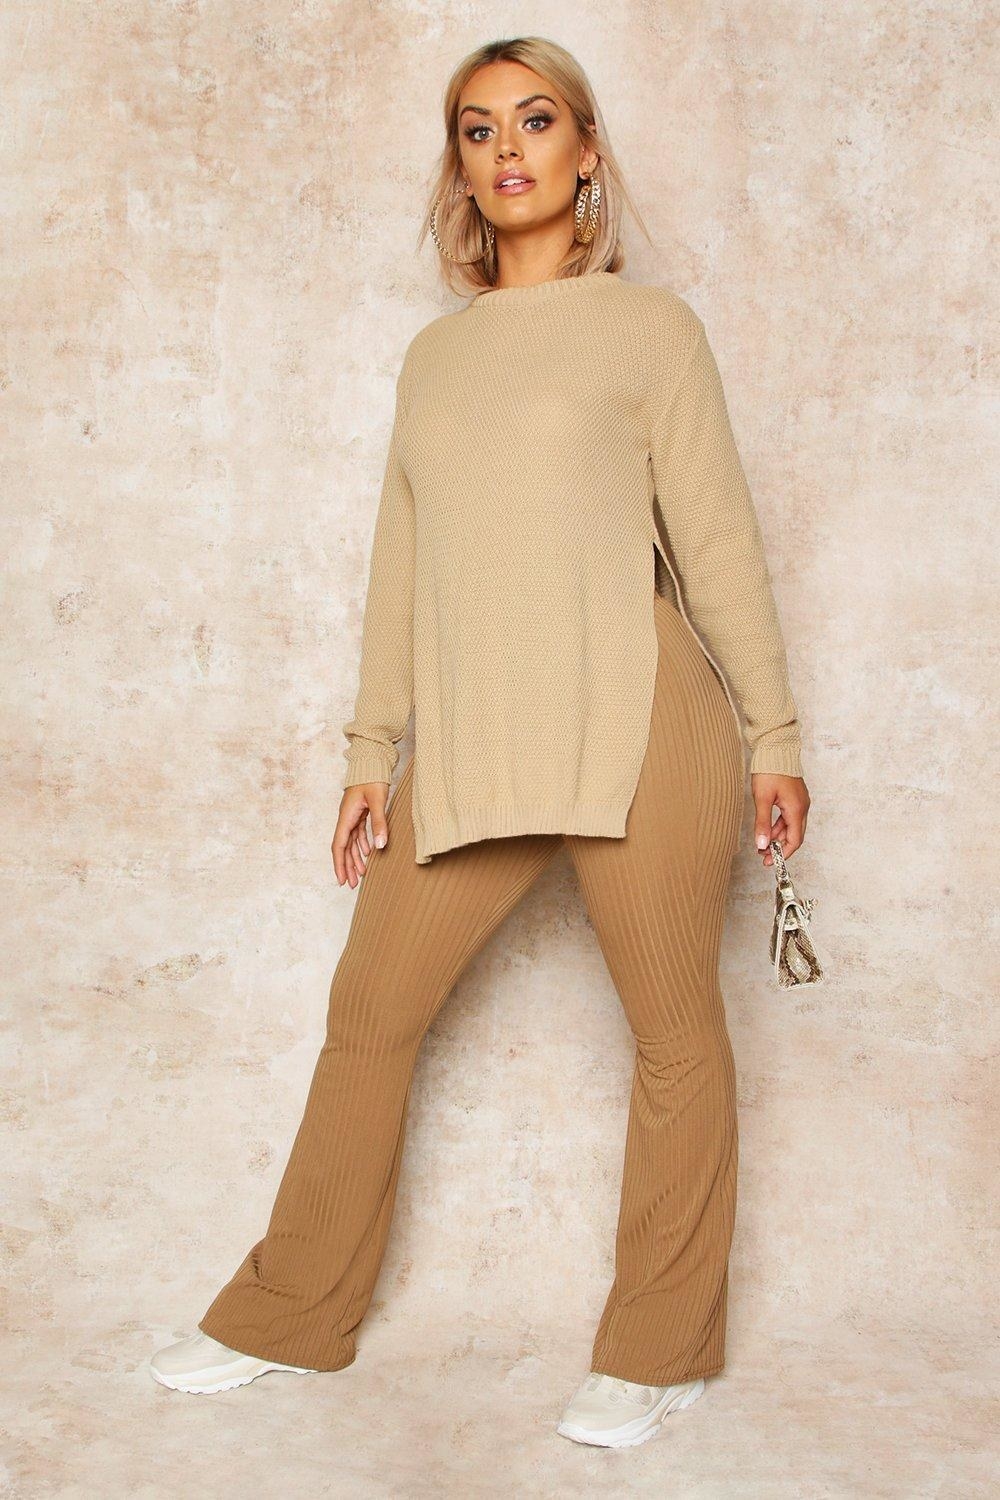 Model wearing brown sweater with slits